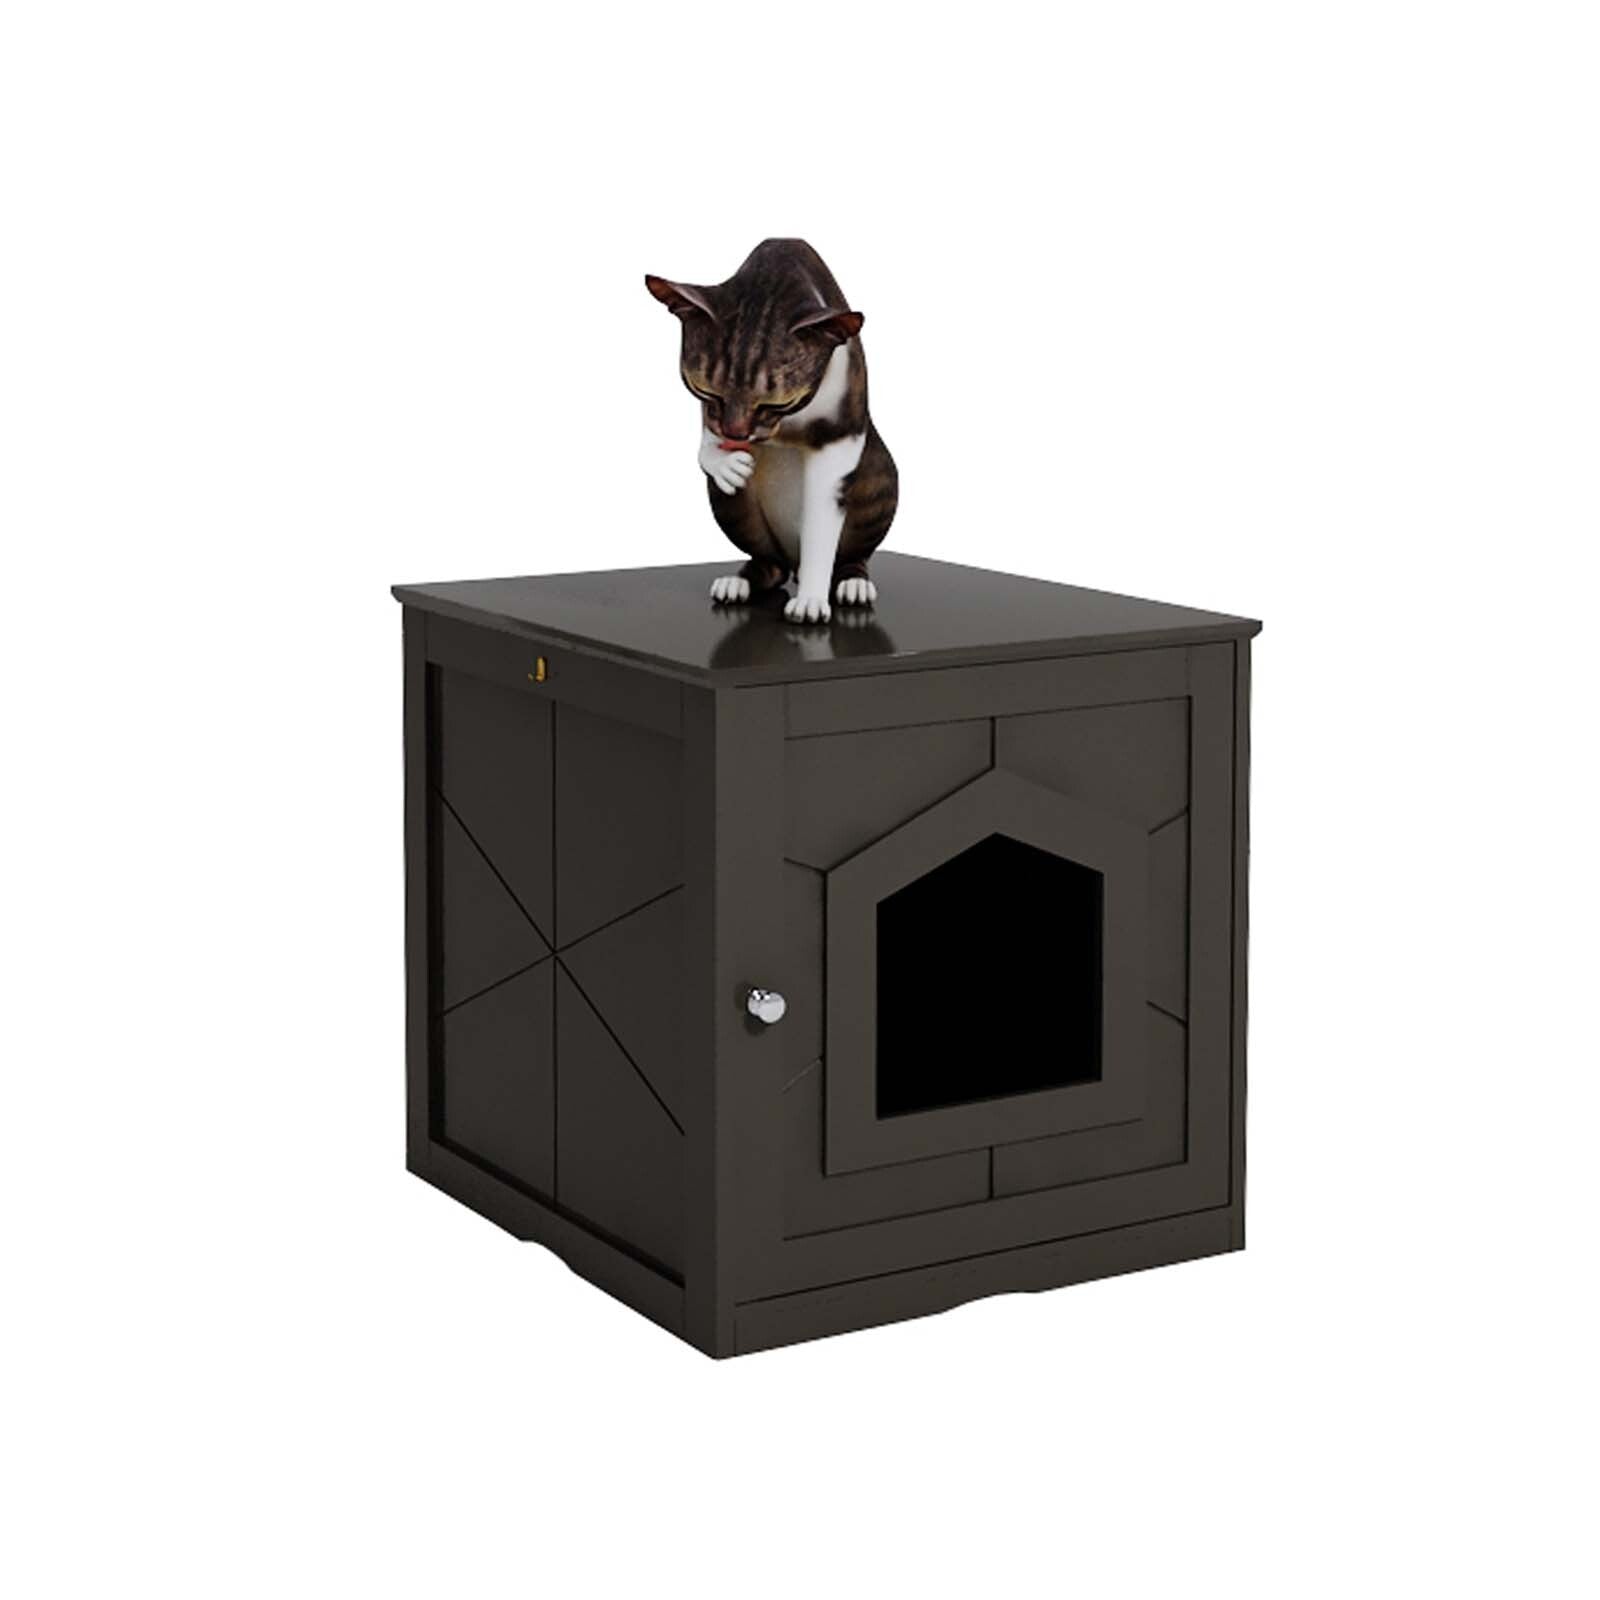 WEIKABU Wooden Indoor Cat Litter Box Enclosure, Cat House & Side Table, Cat Home Furniture Nightstand, Brown